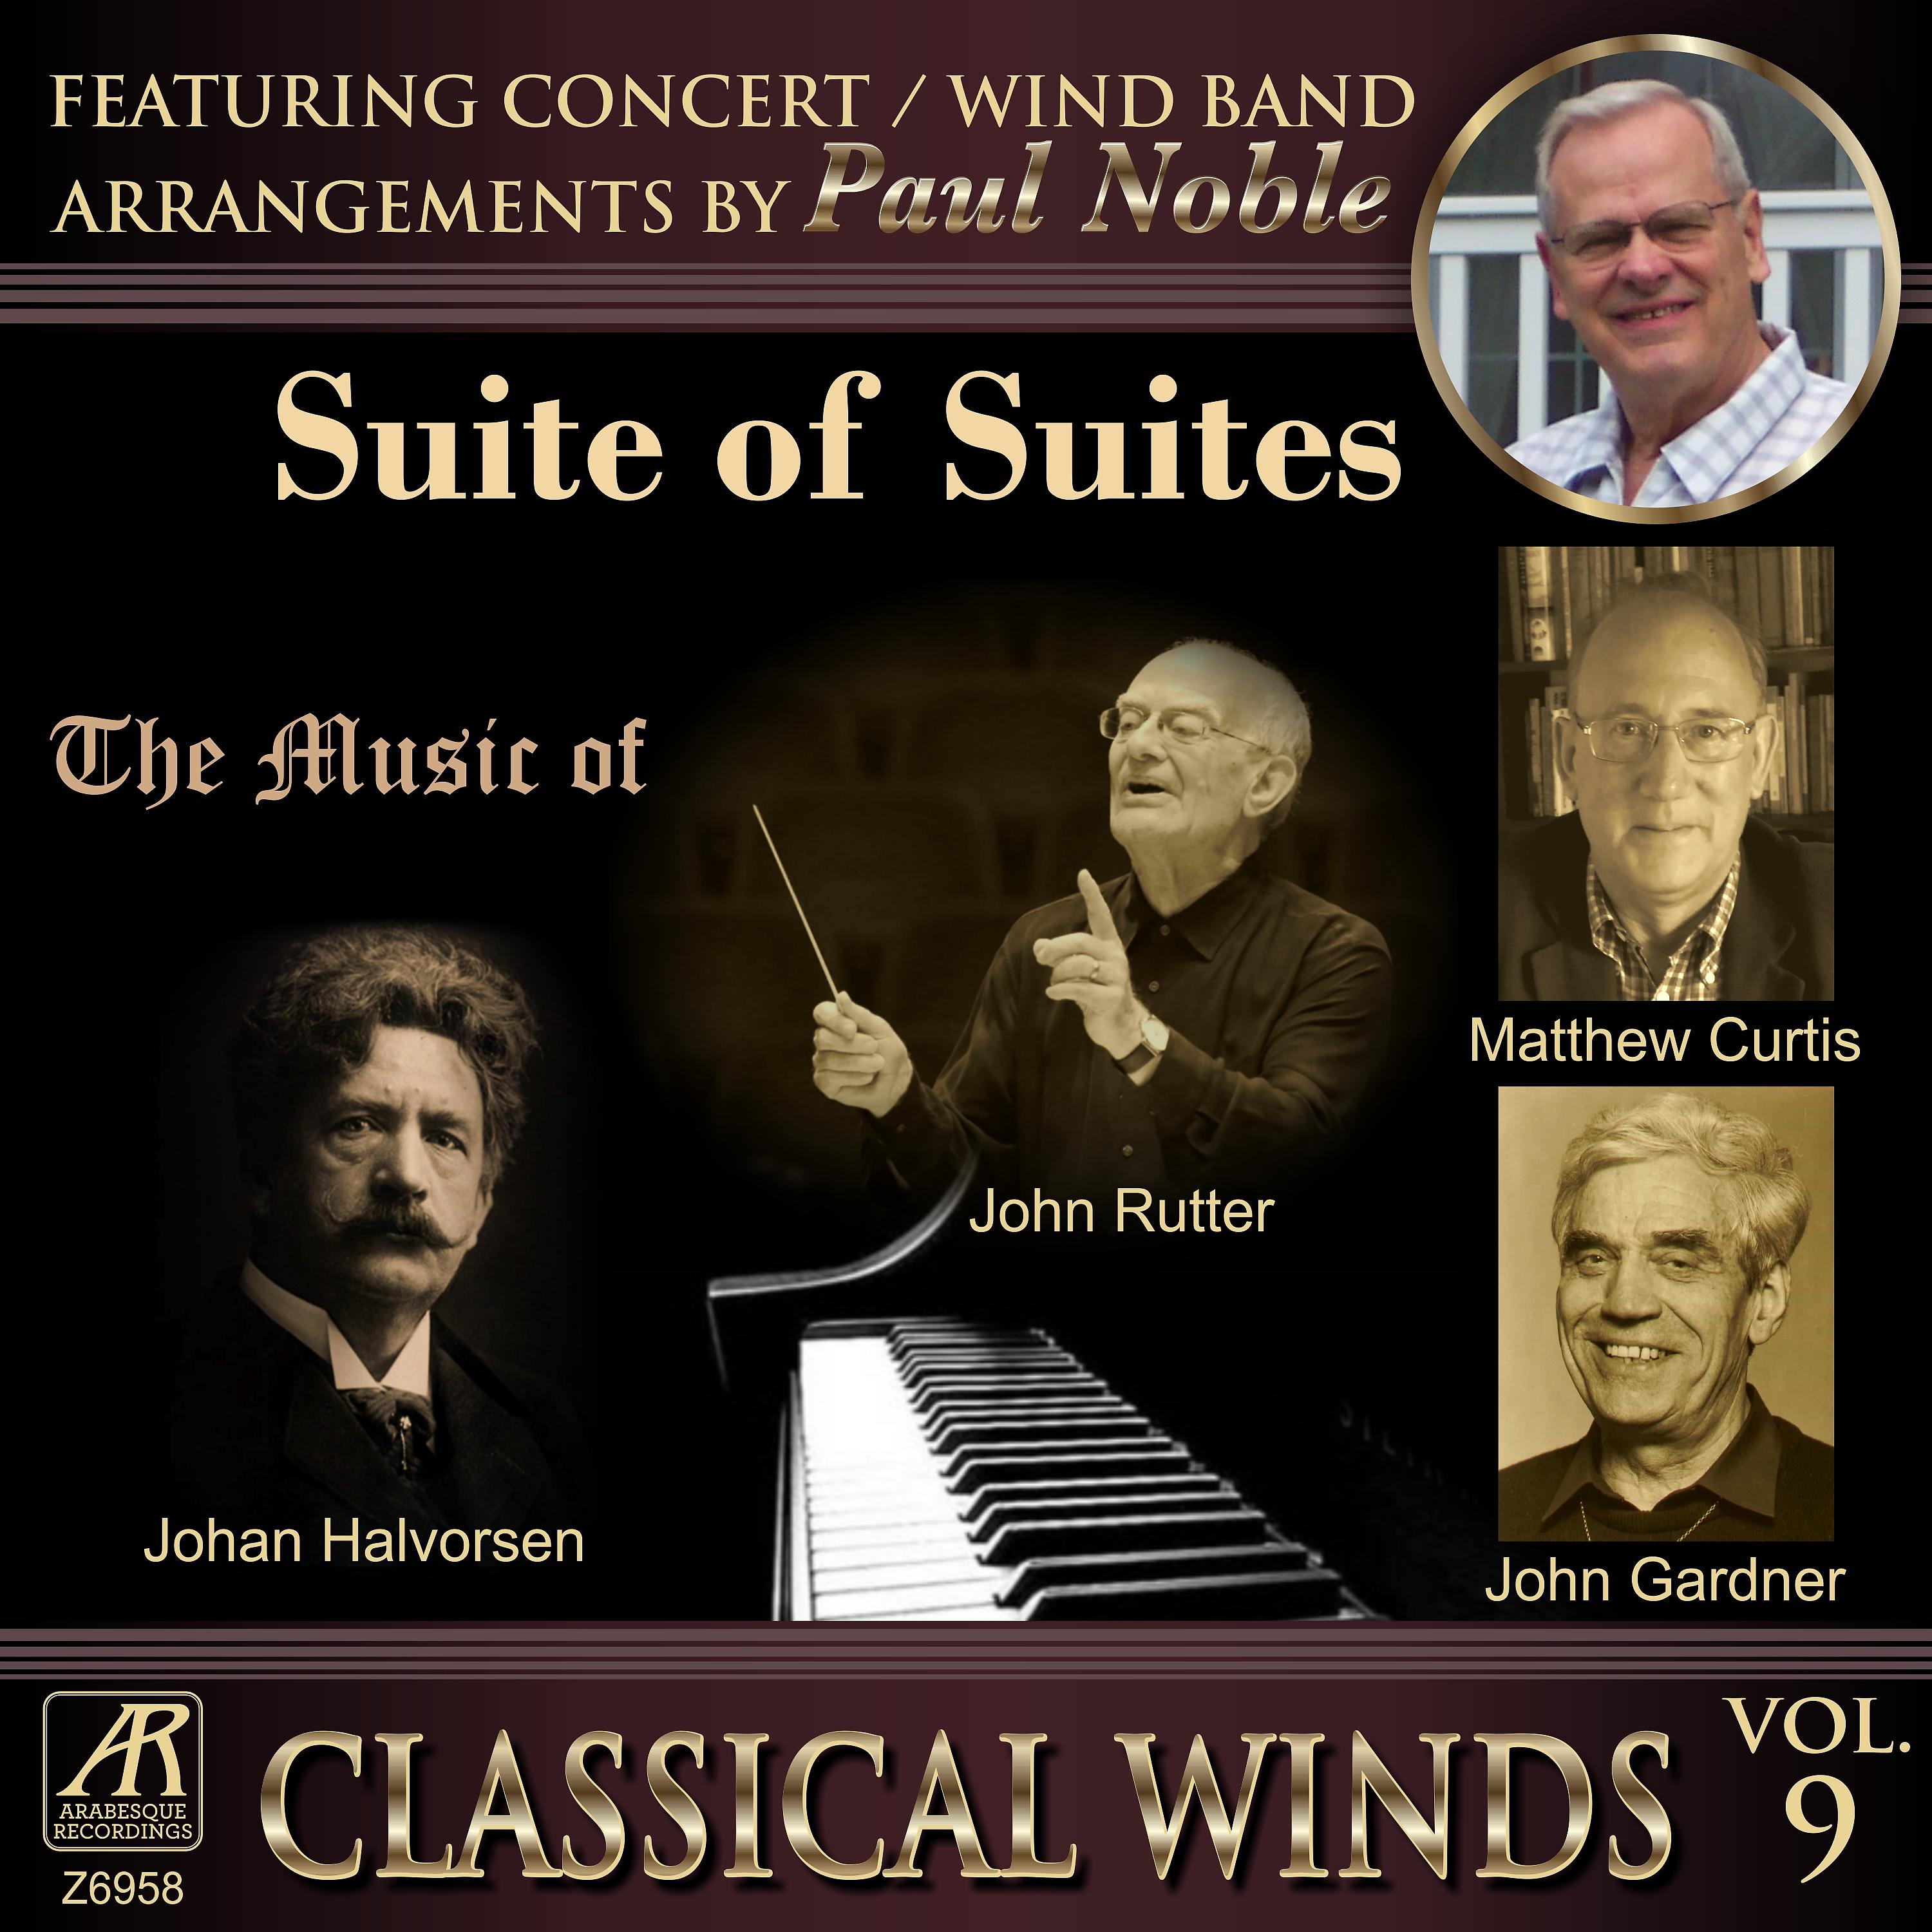 Постер альбома Classical Winds, Vol. 9: Suite of Suites, featuring concert band arrangements by Paul Noble